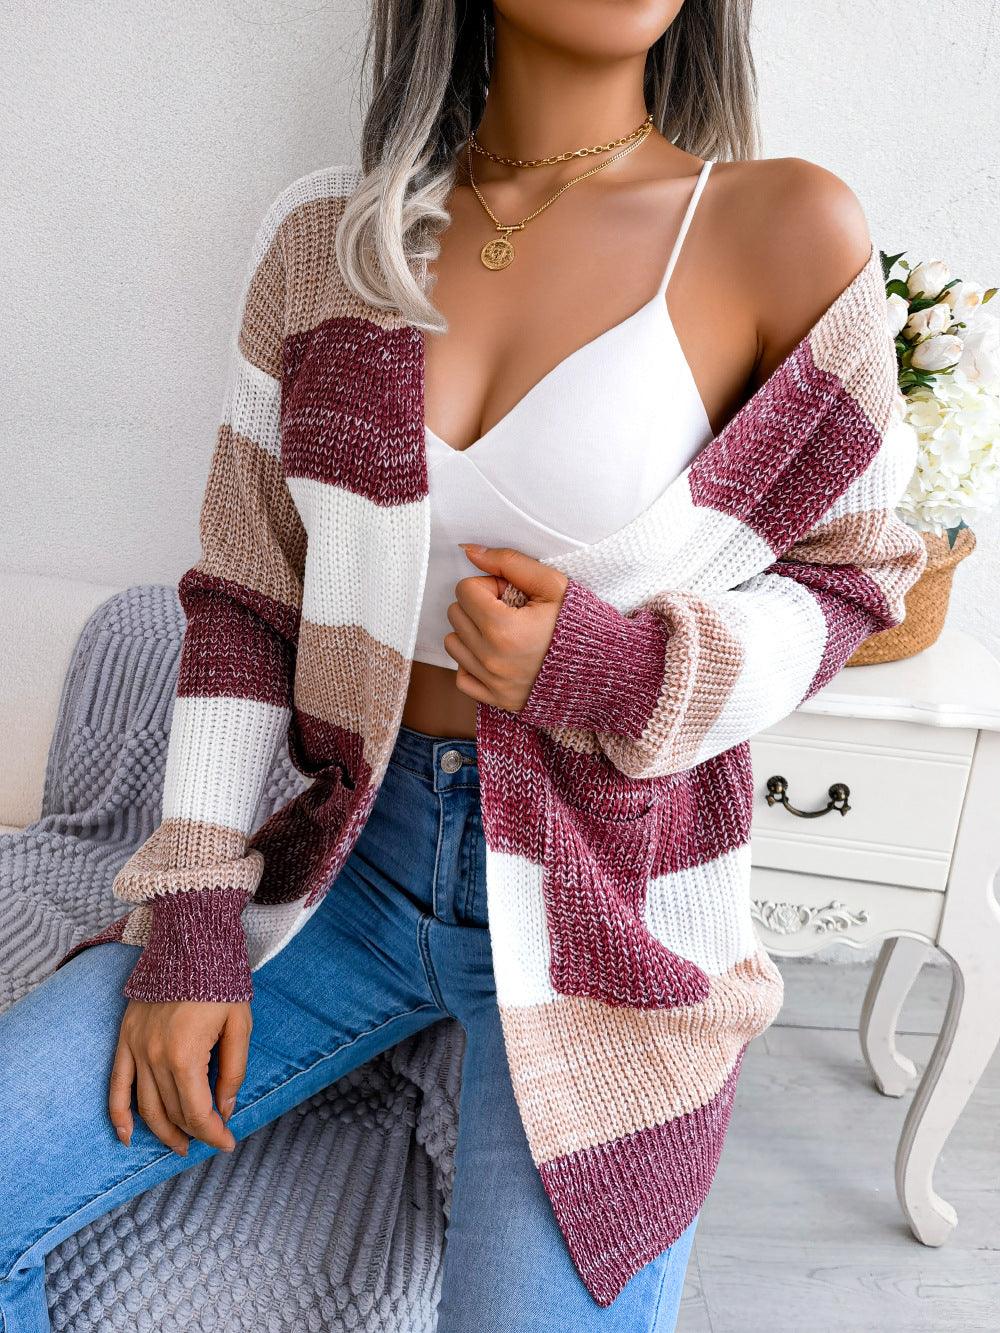 Plaid Sweater Women Casual Lantern Sleeves Cardigan Jacket Outerwear Clothes - Trendha